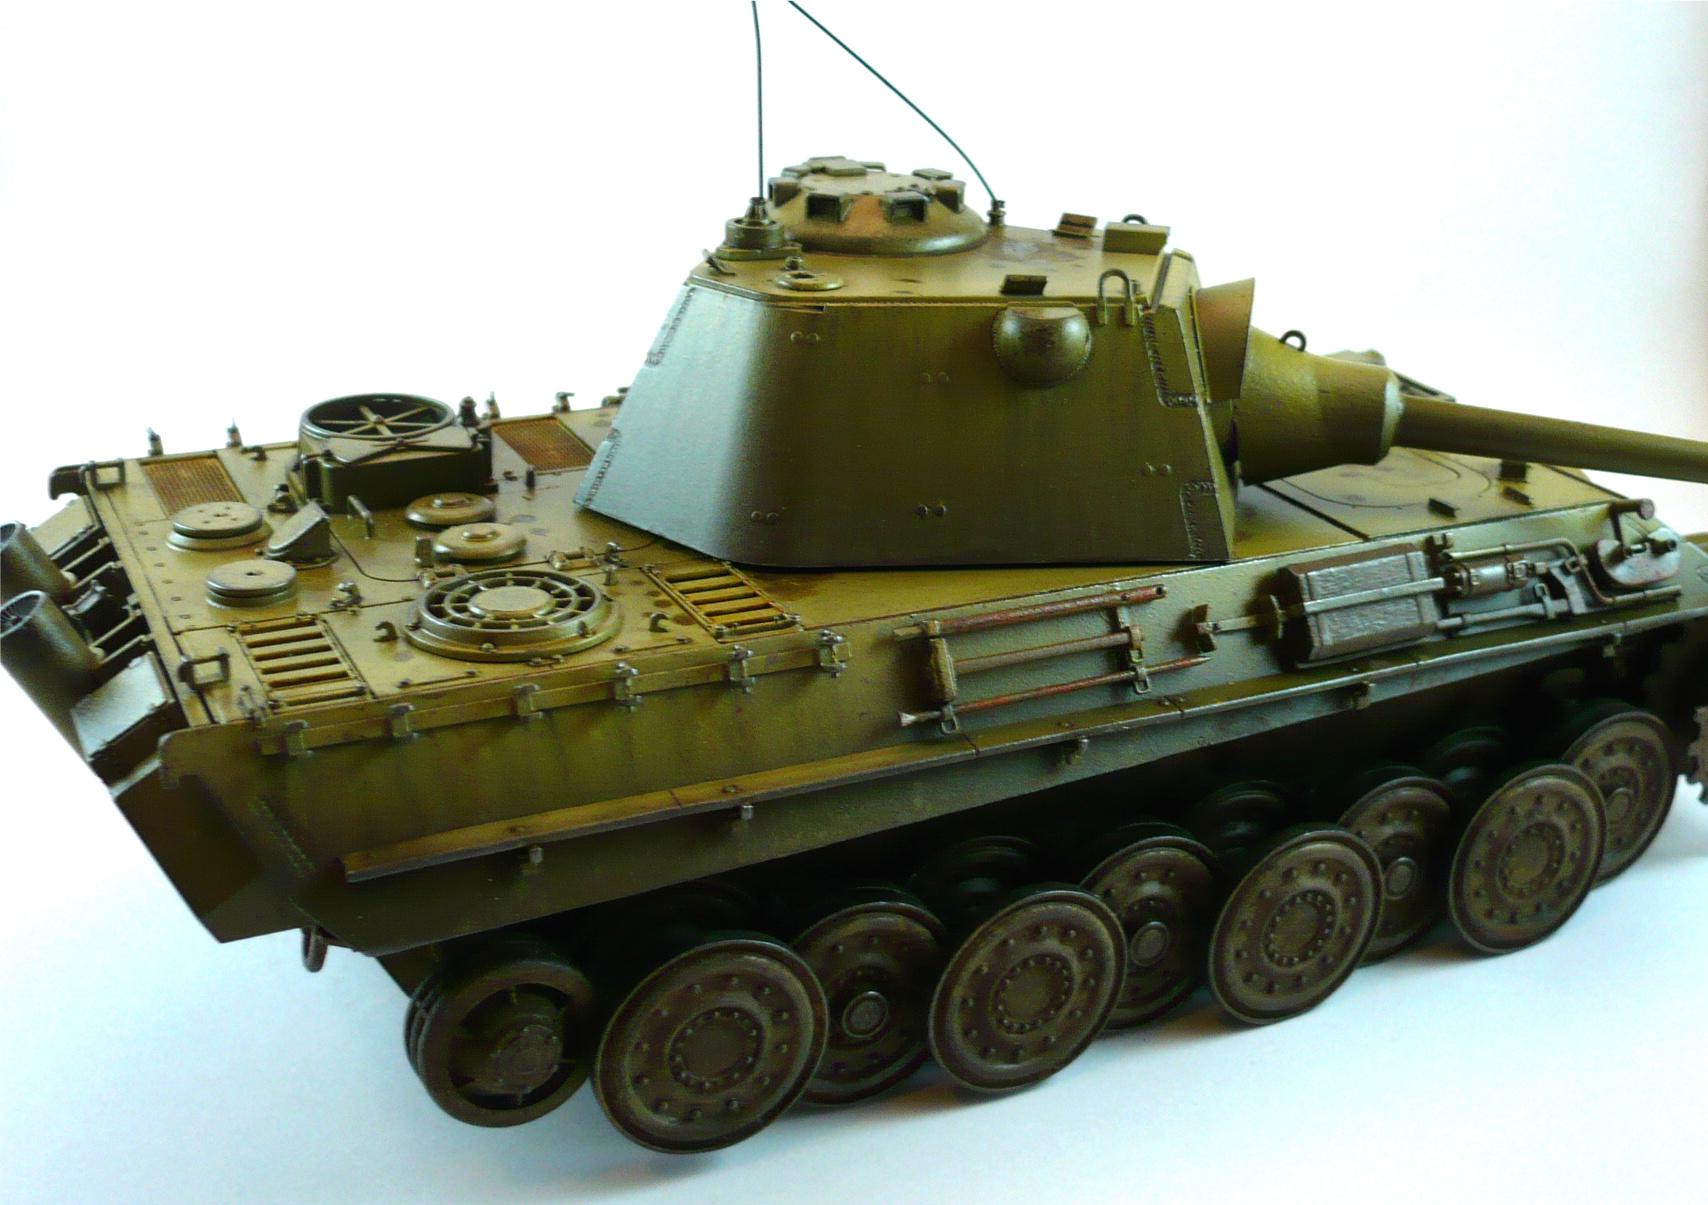 1/35, Germans, Military Modelling, Panther, Scale Modelling, Tiger